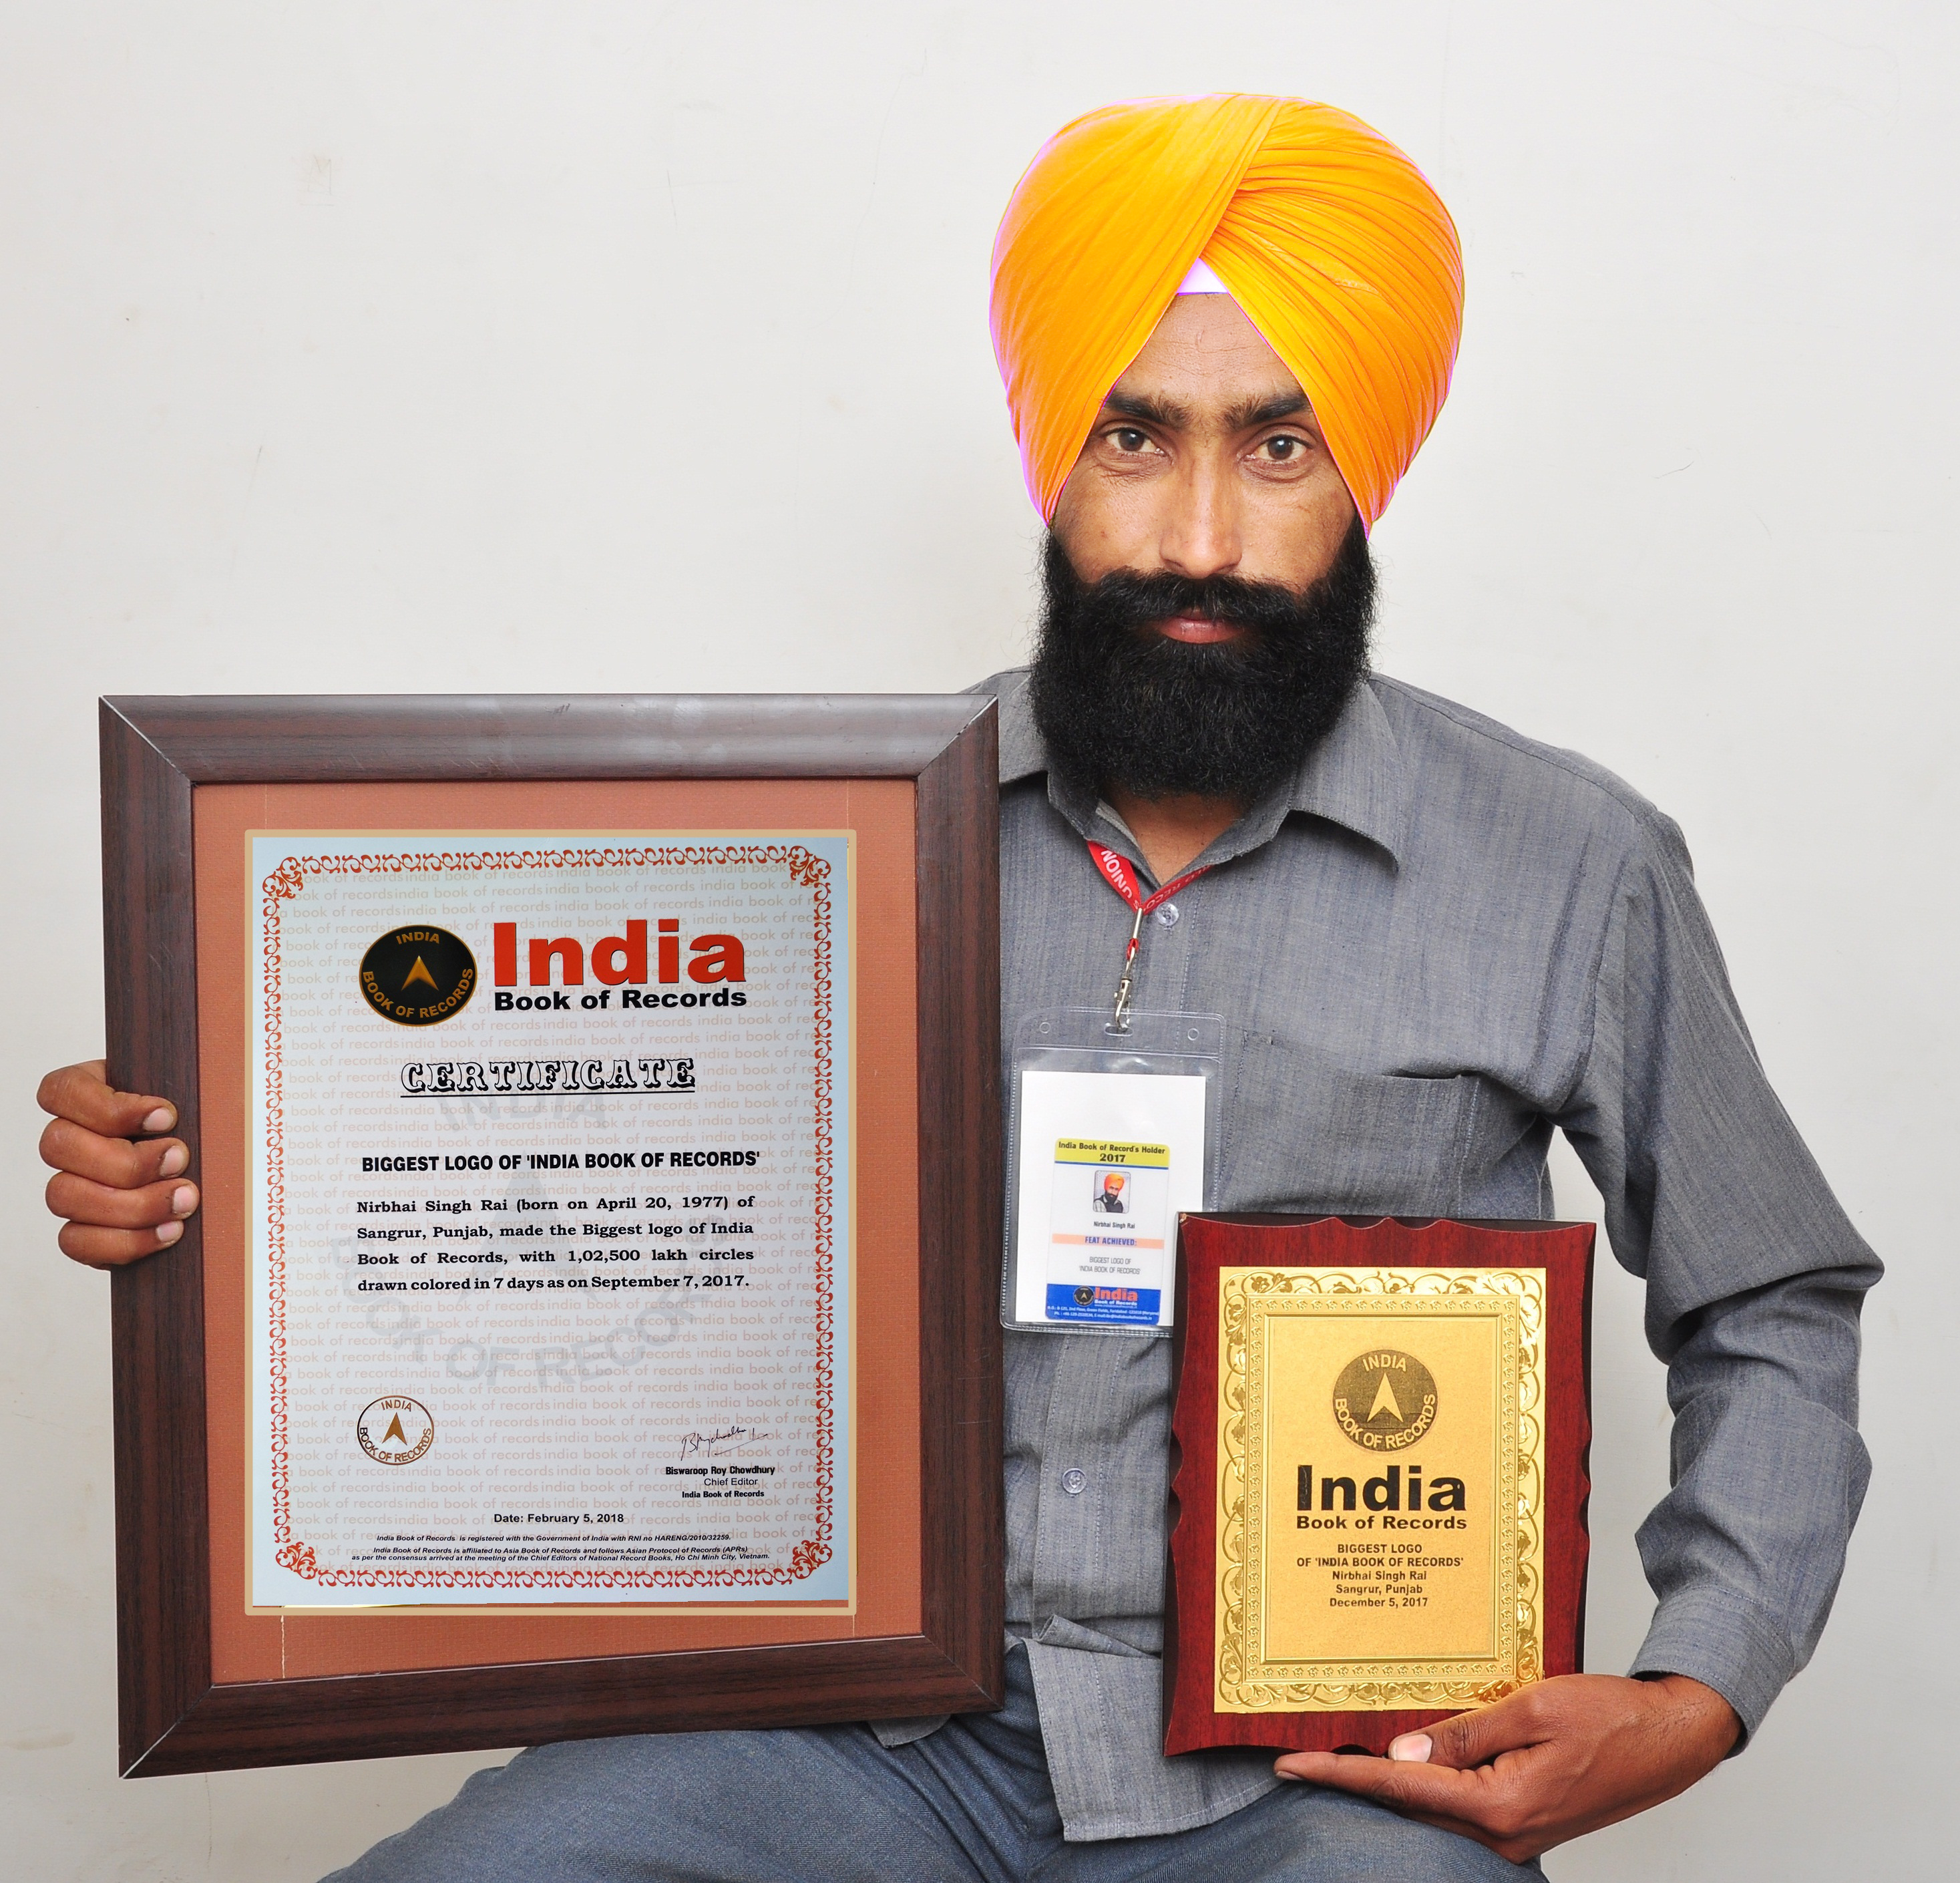 about india book of records